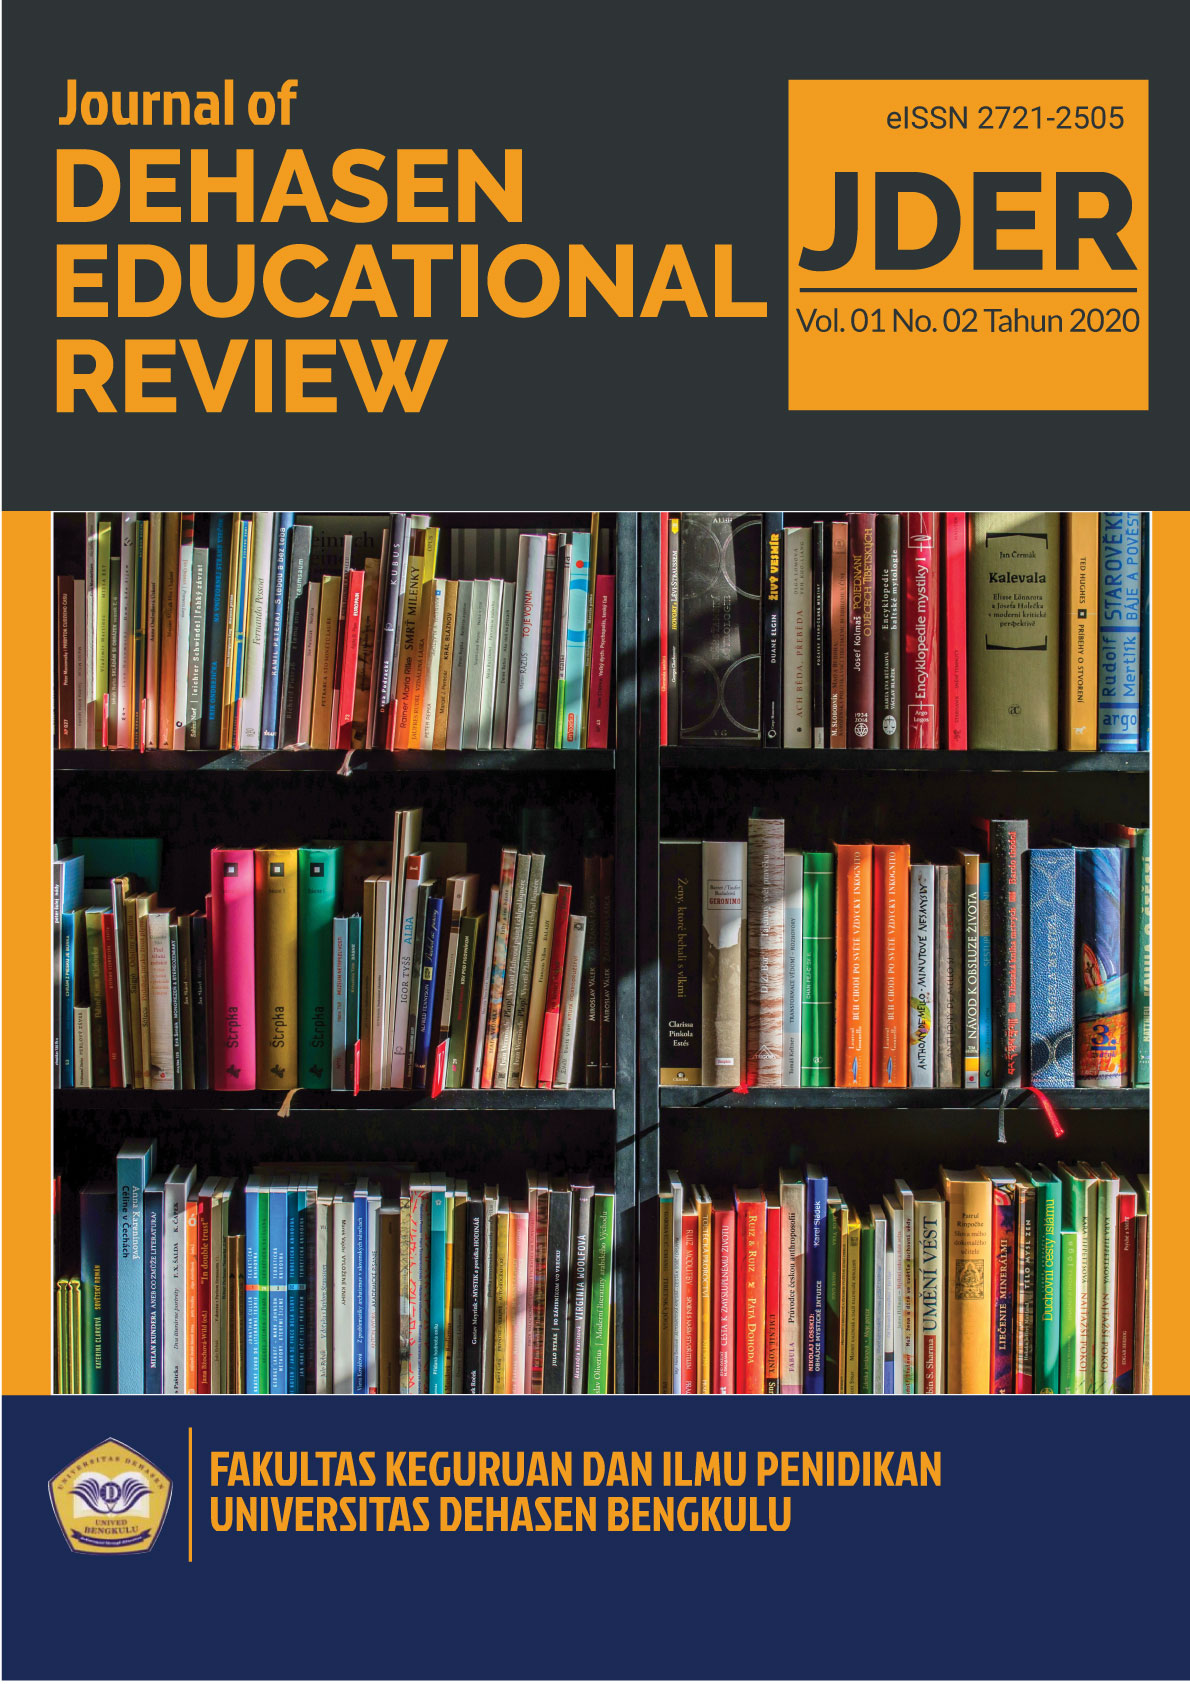 Journal of Dehasen Educational Review